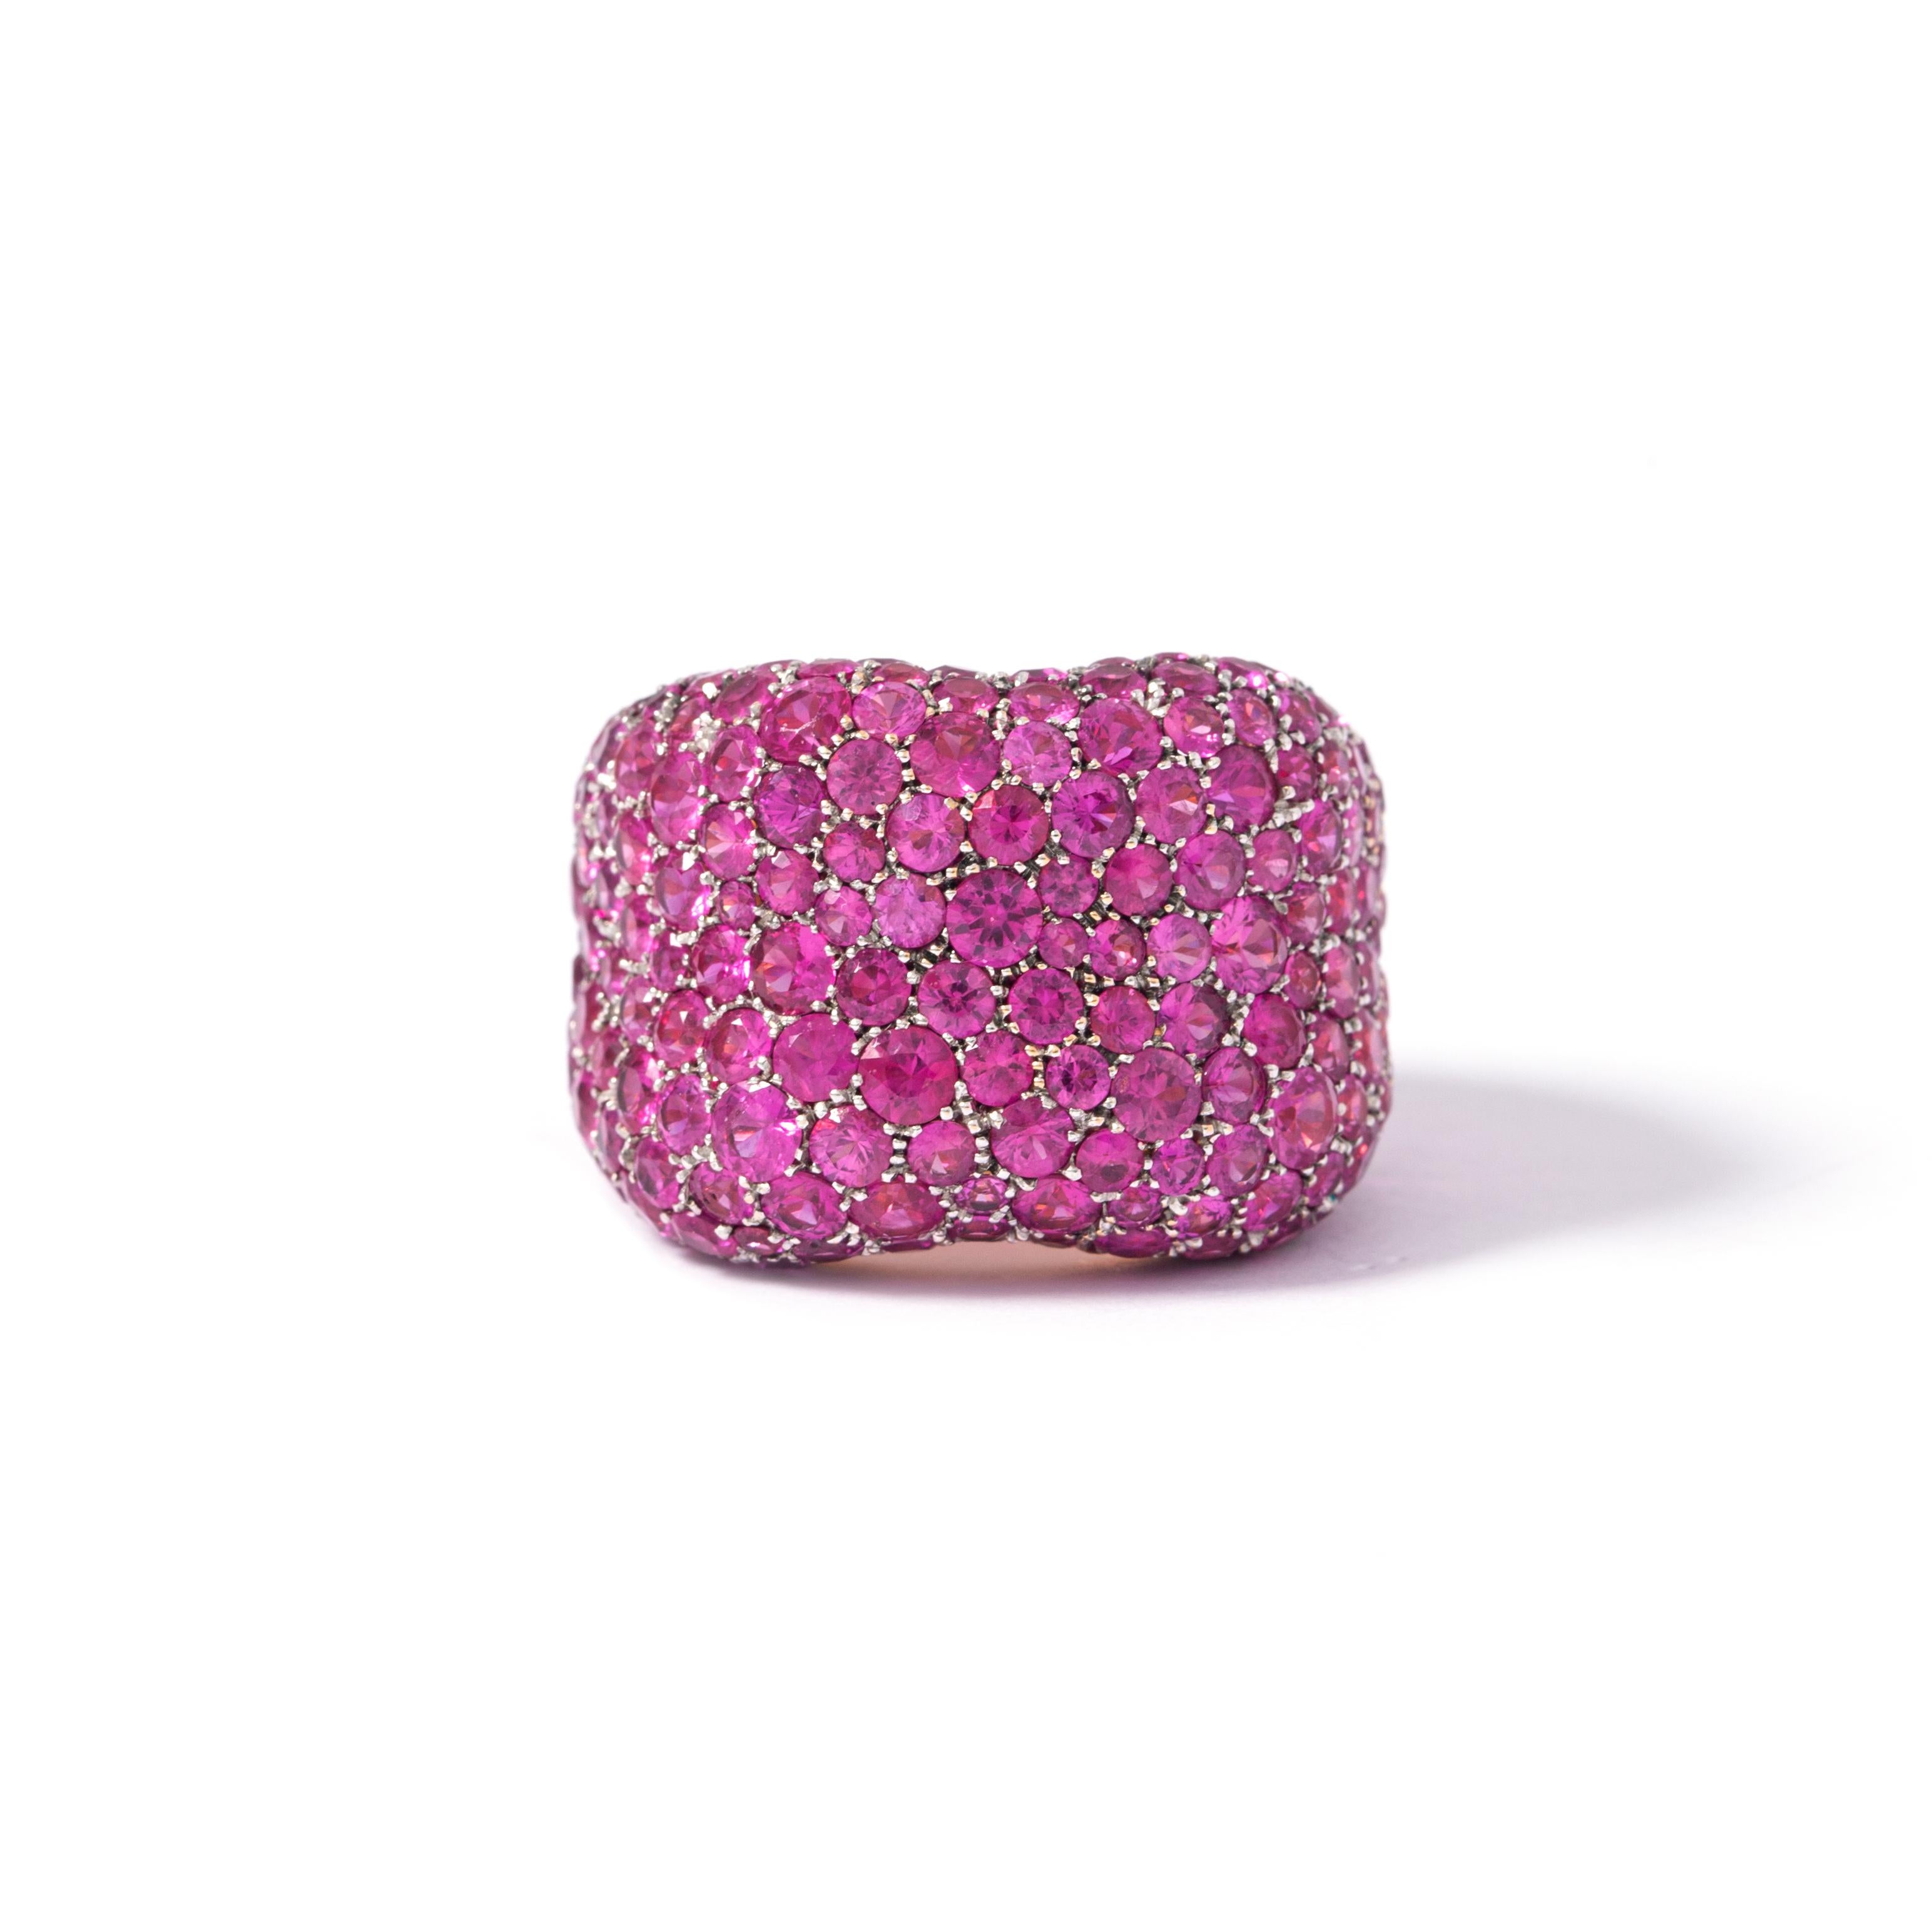 Fabergé model Emotion ring in Rose gold 18K full pave set with Pink Sapphires.
Gross weight: 16.32 grams.
Size: 7 (54).